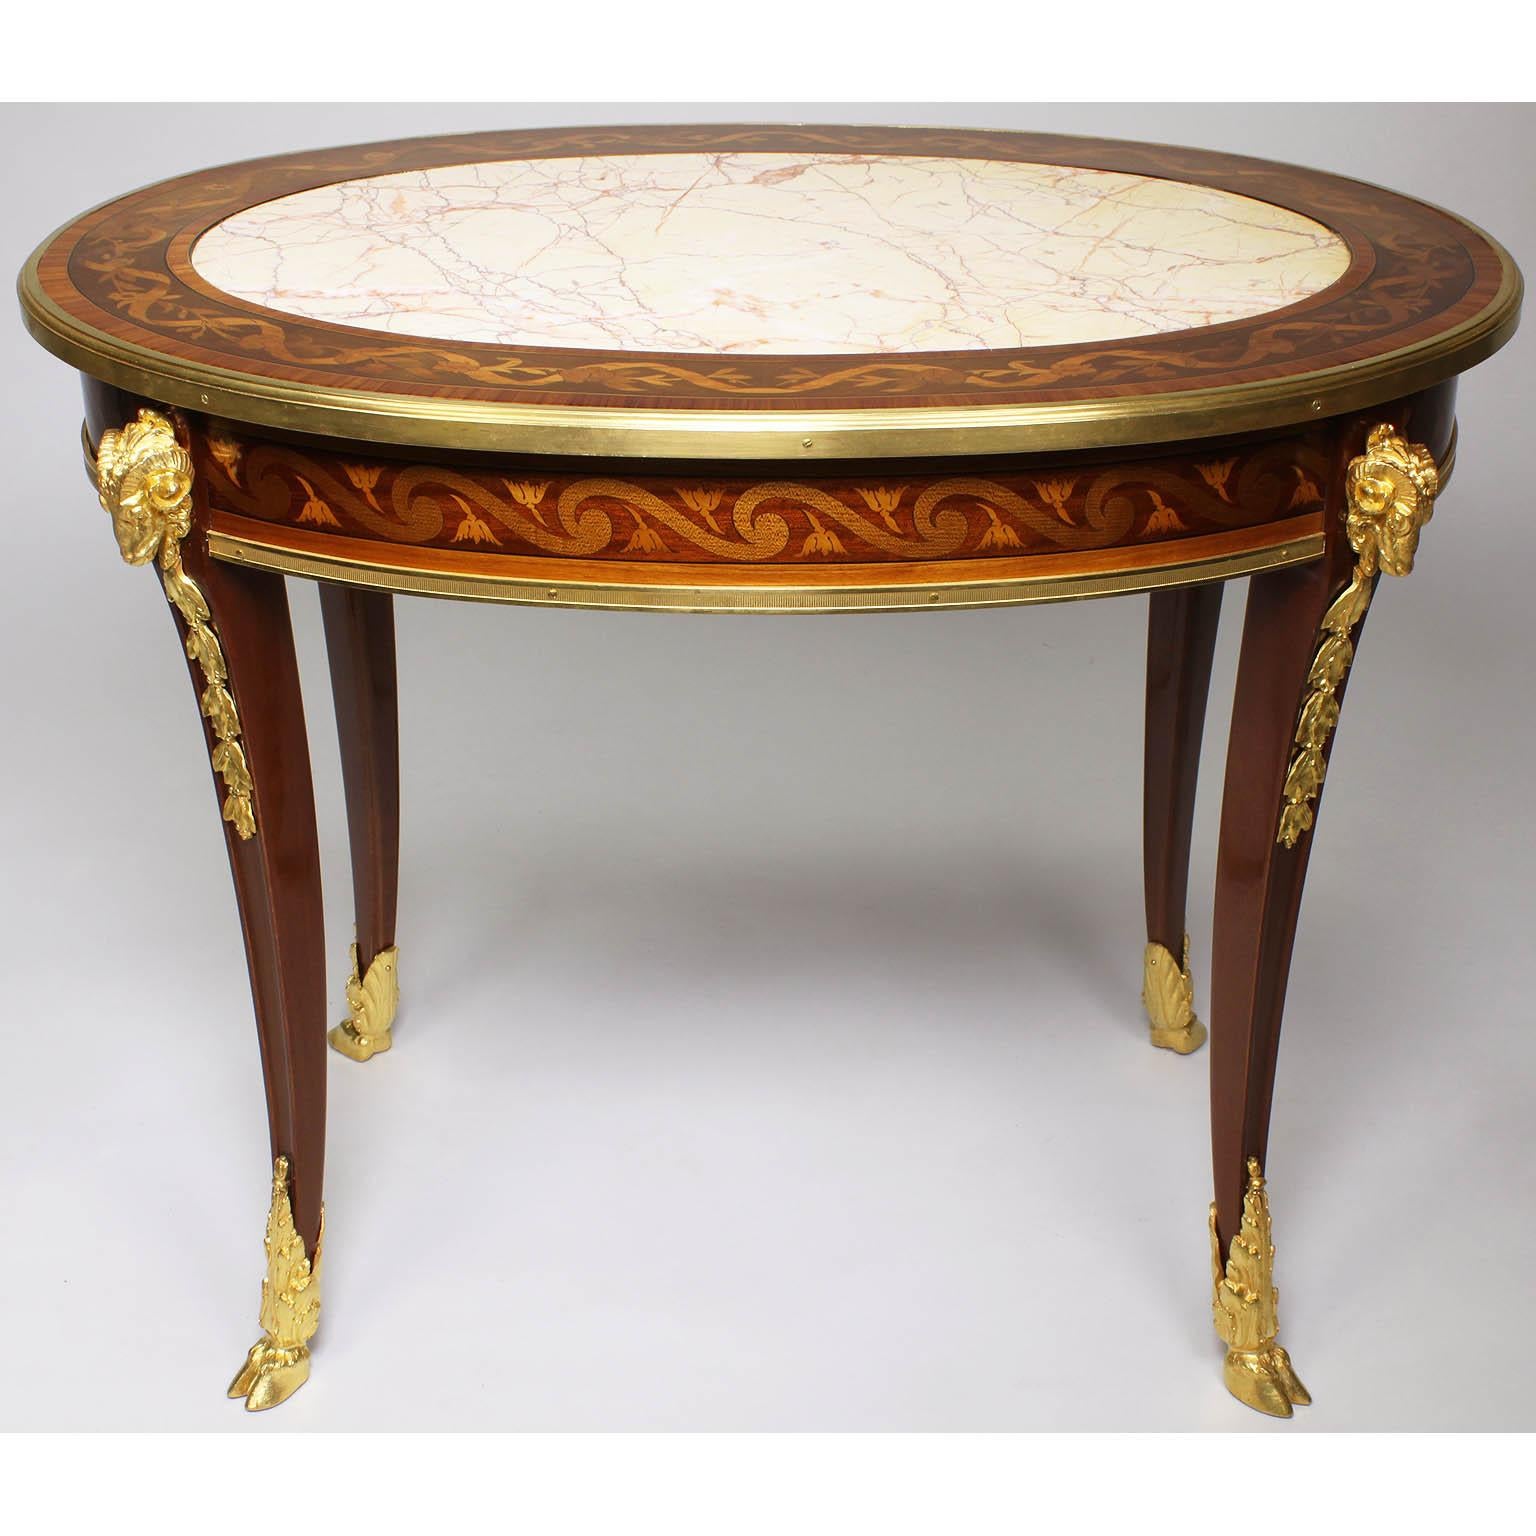 A very fine French Louis XV style Belle Époque figural ormolu-mounted mahogany, tulipwood and fruitwood marquetry oval coffee table with marble top, in the manner of François Linke (1855-1946). The low table with a finely inlaid border top and apron